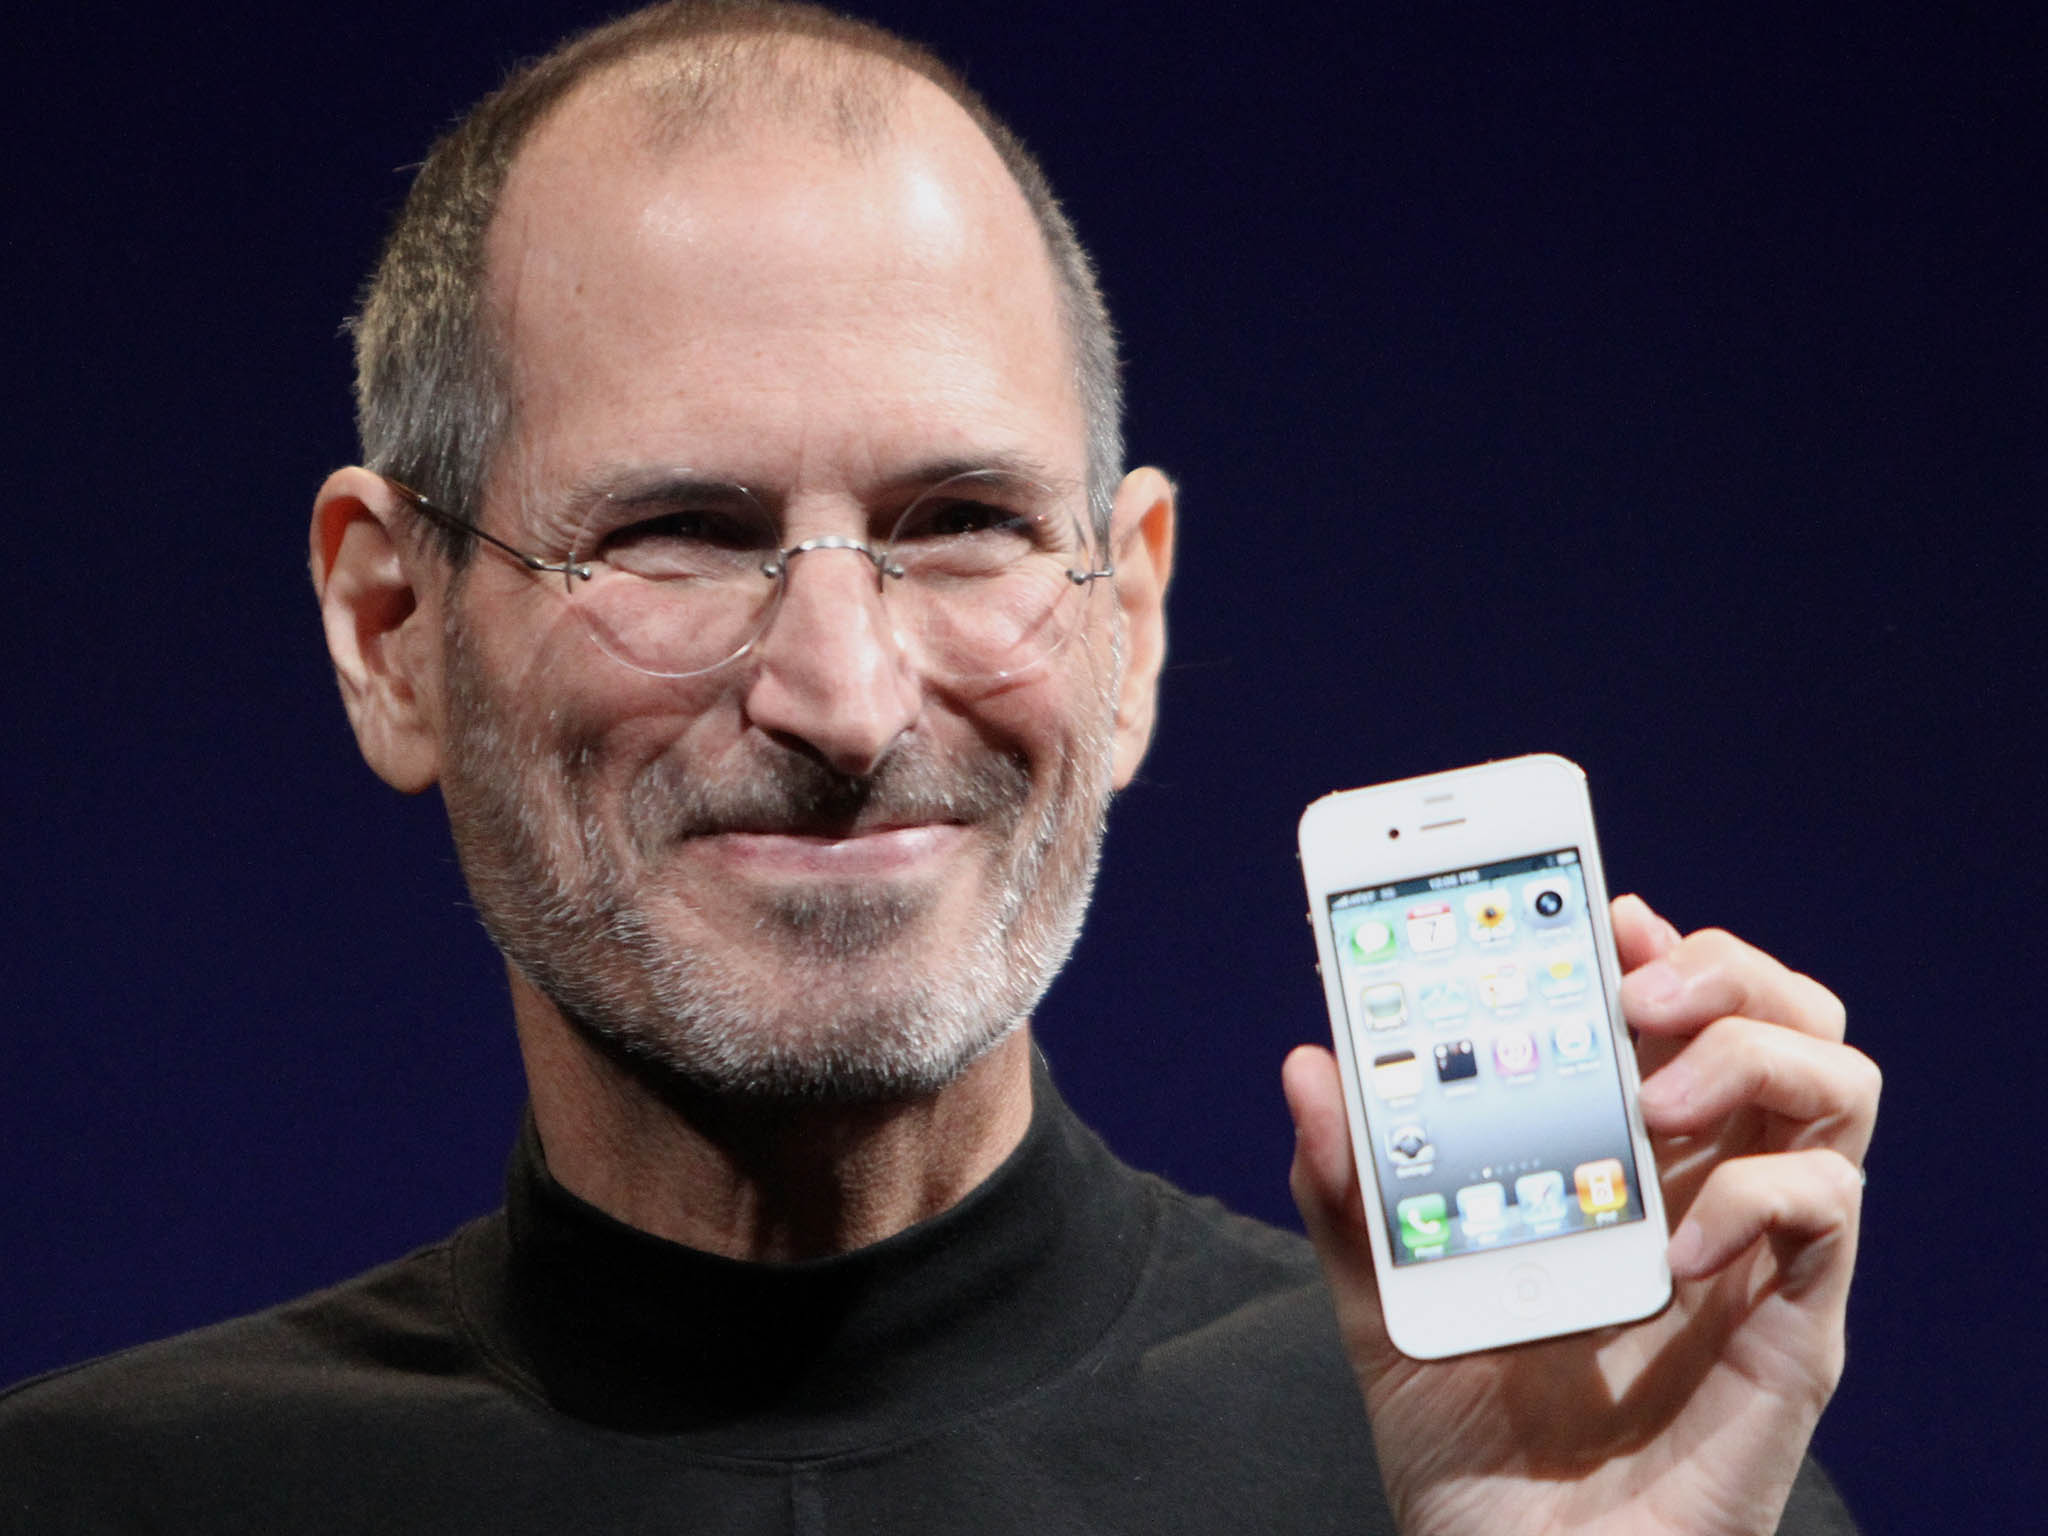 Steve Jobs awarded 141 new patents since his death